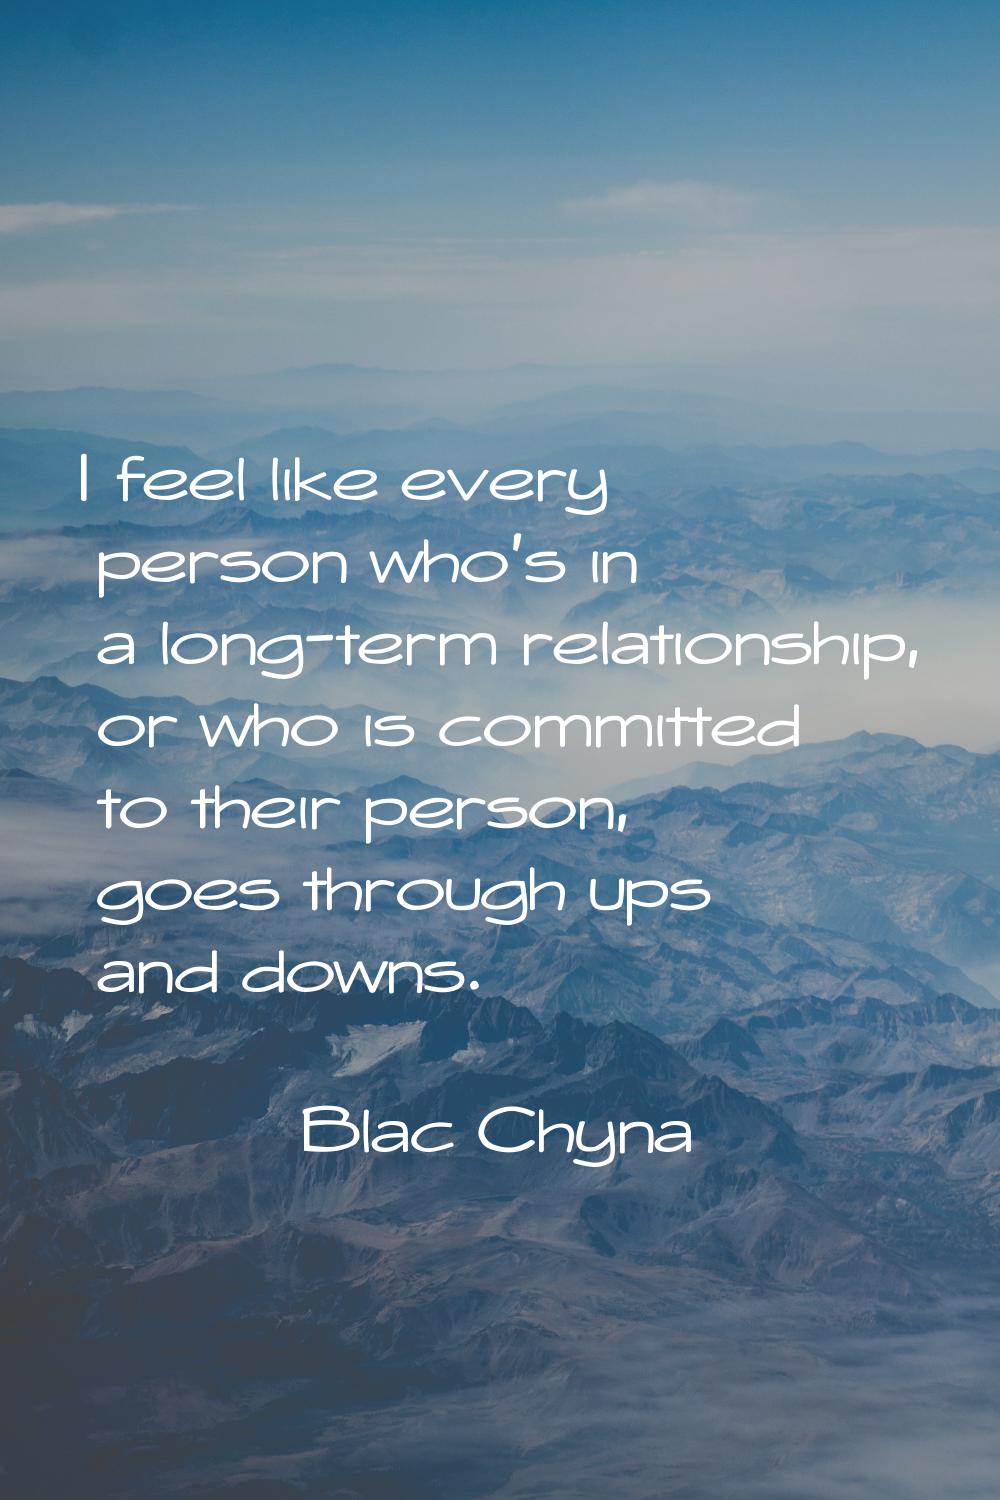 I feel like every person who's in a long-term relationship, or who is committed to their person, go